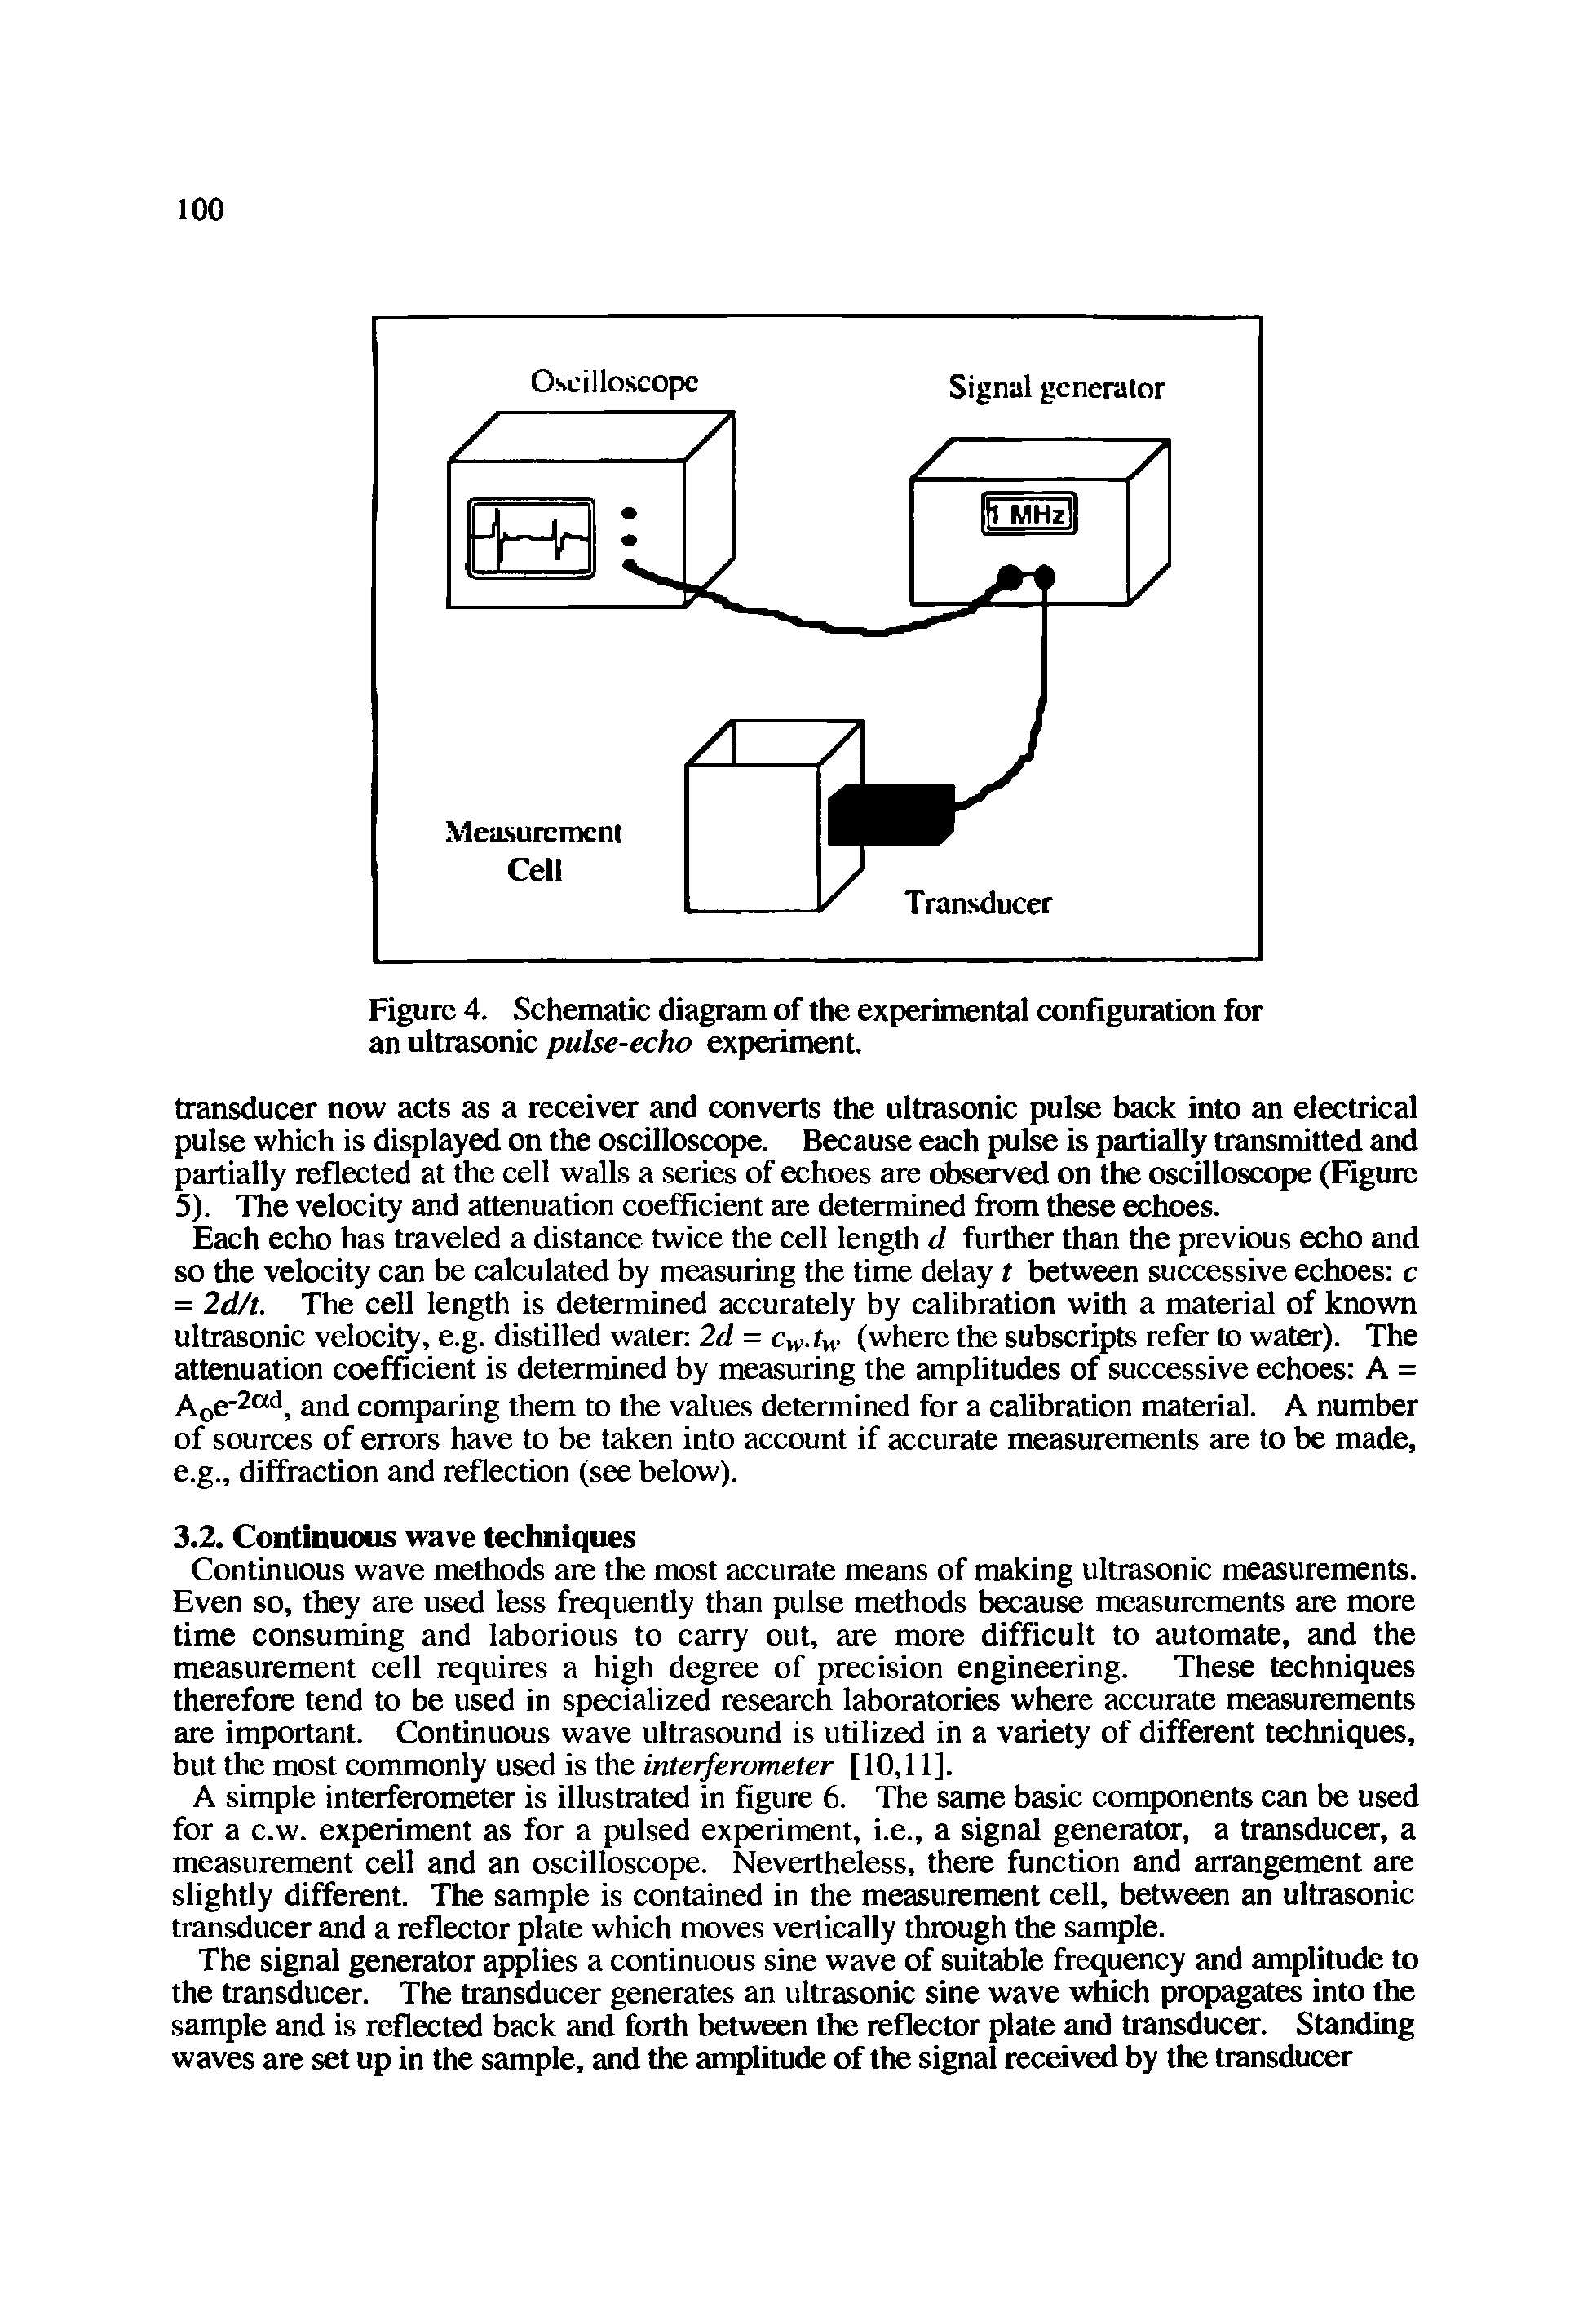 Figure 4. Schematic diagram of the experimental configuration for an ultrasonic pulse-echo experiment.